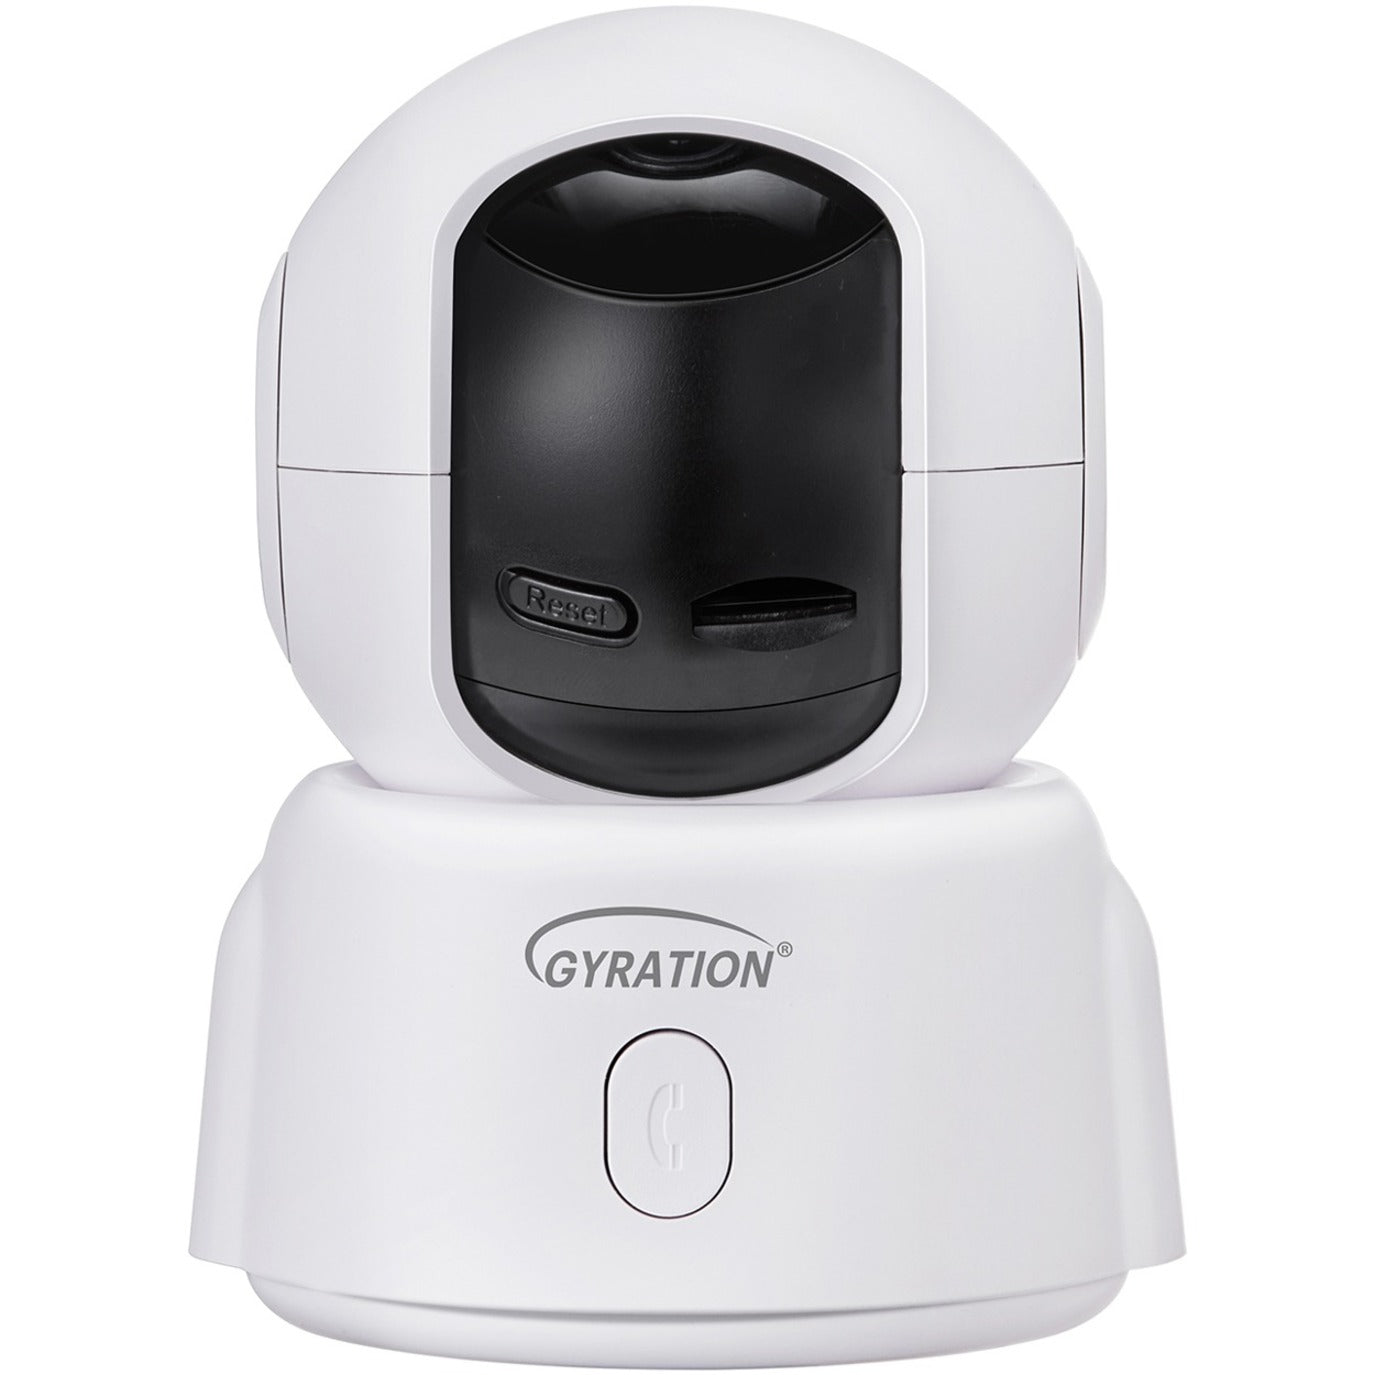 Gyration CYBERVIEW 2000 2MP Smart WiFi Pan/Tilt Camera, High Quality 1080p Resolution, Motion Detection, Night Vision